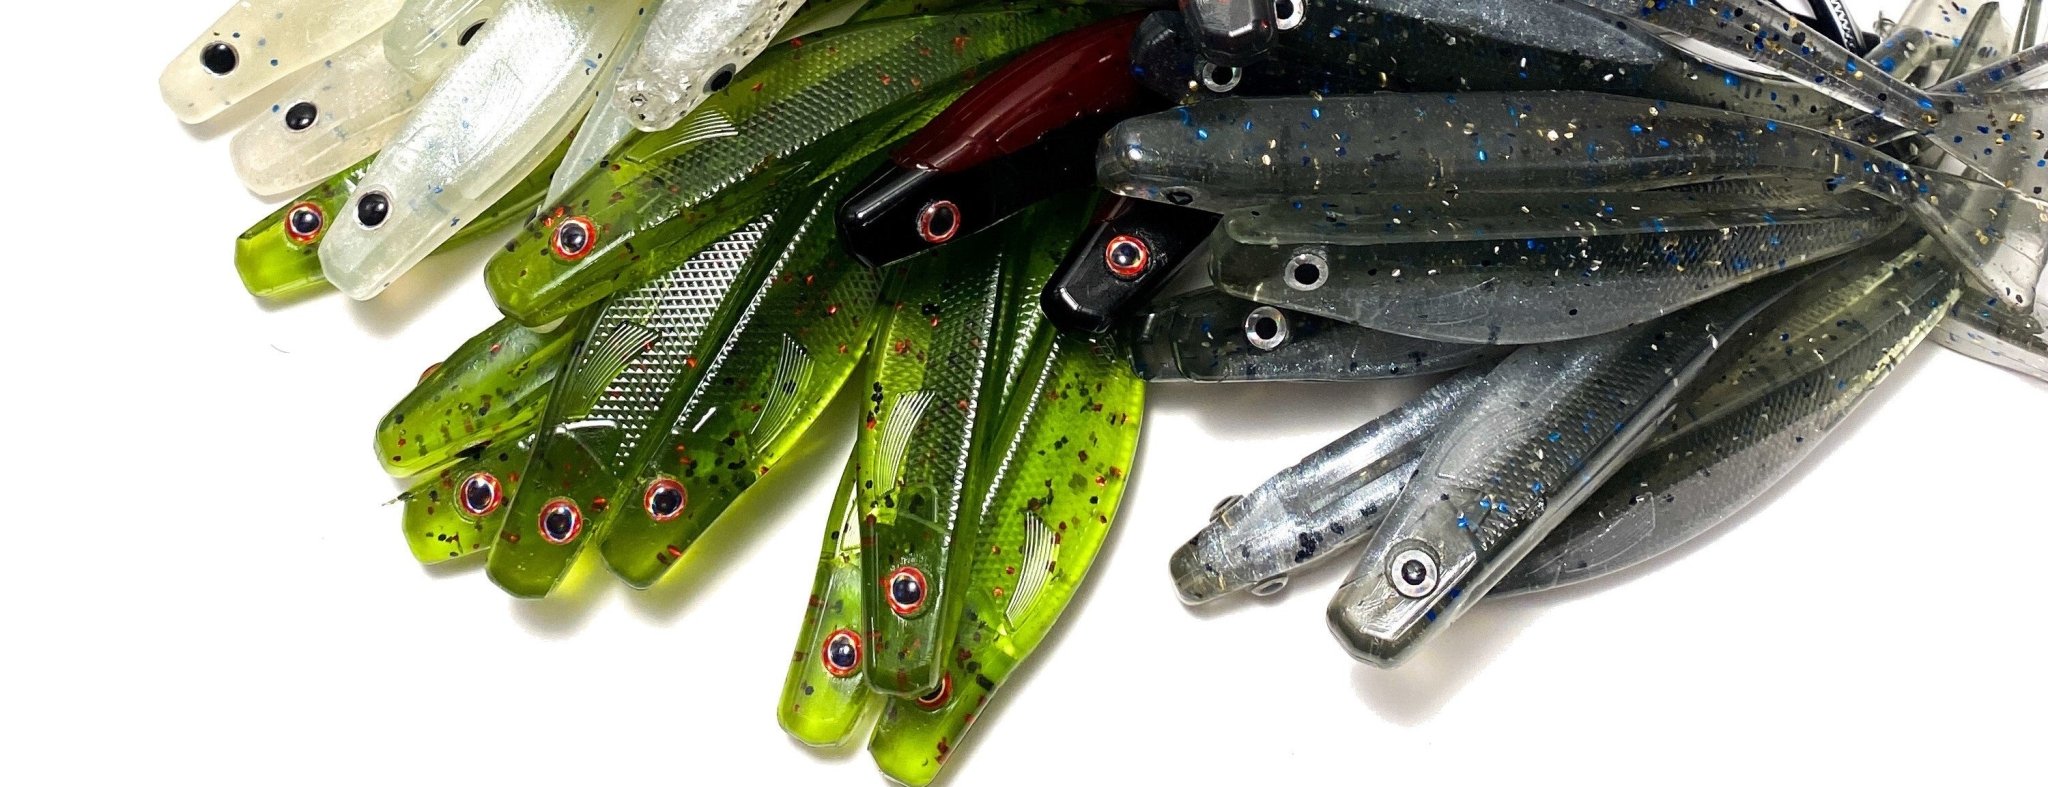 need help with a color - Soft Plastics 